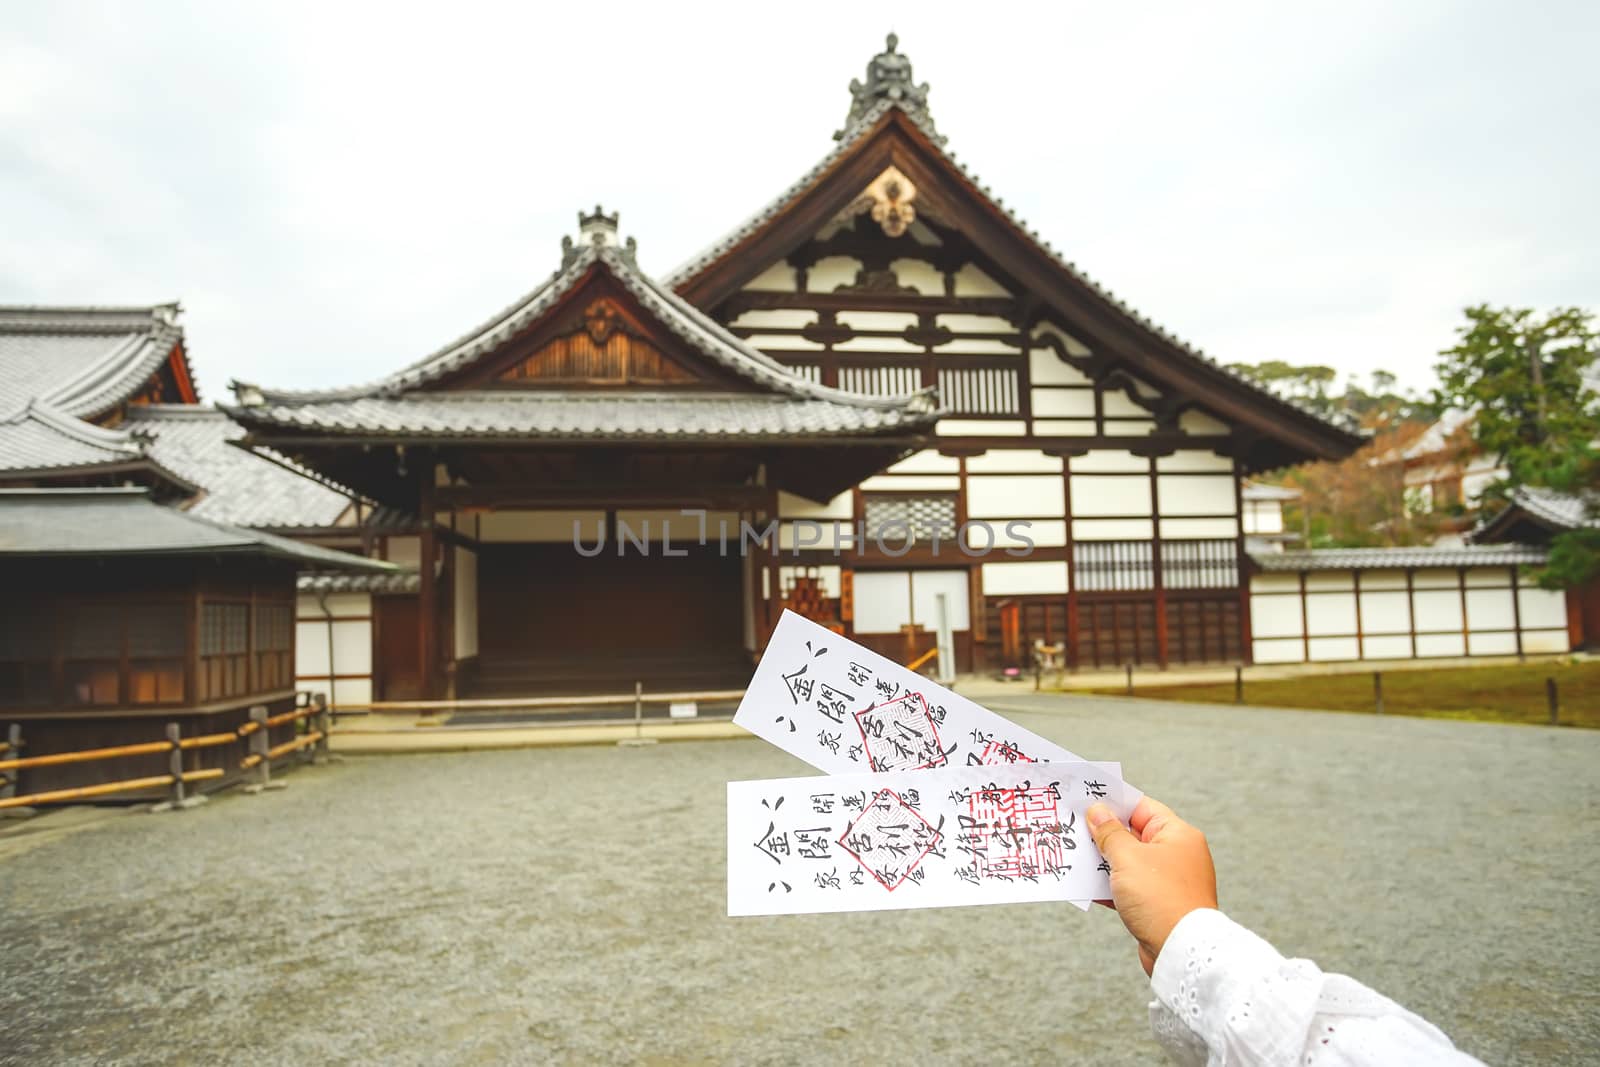 Kyoto, Japan - December 17, 2019 : Two tickets of Kinkakuji temple on Asian woman hand with Japanese style building background.